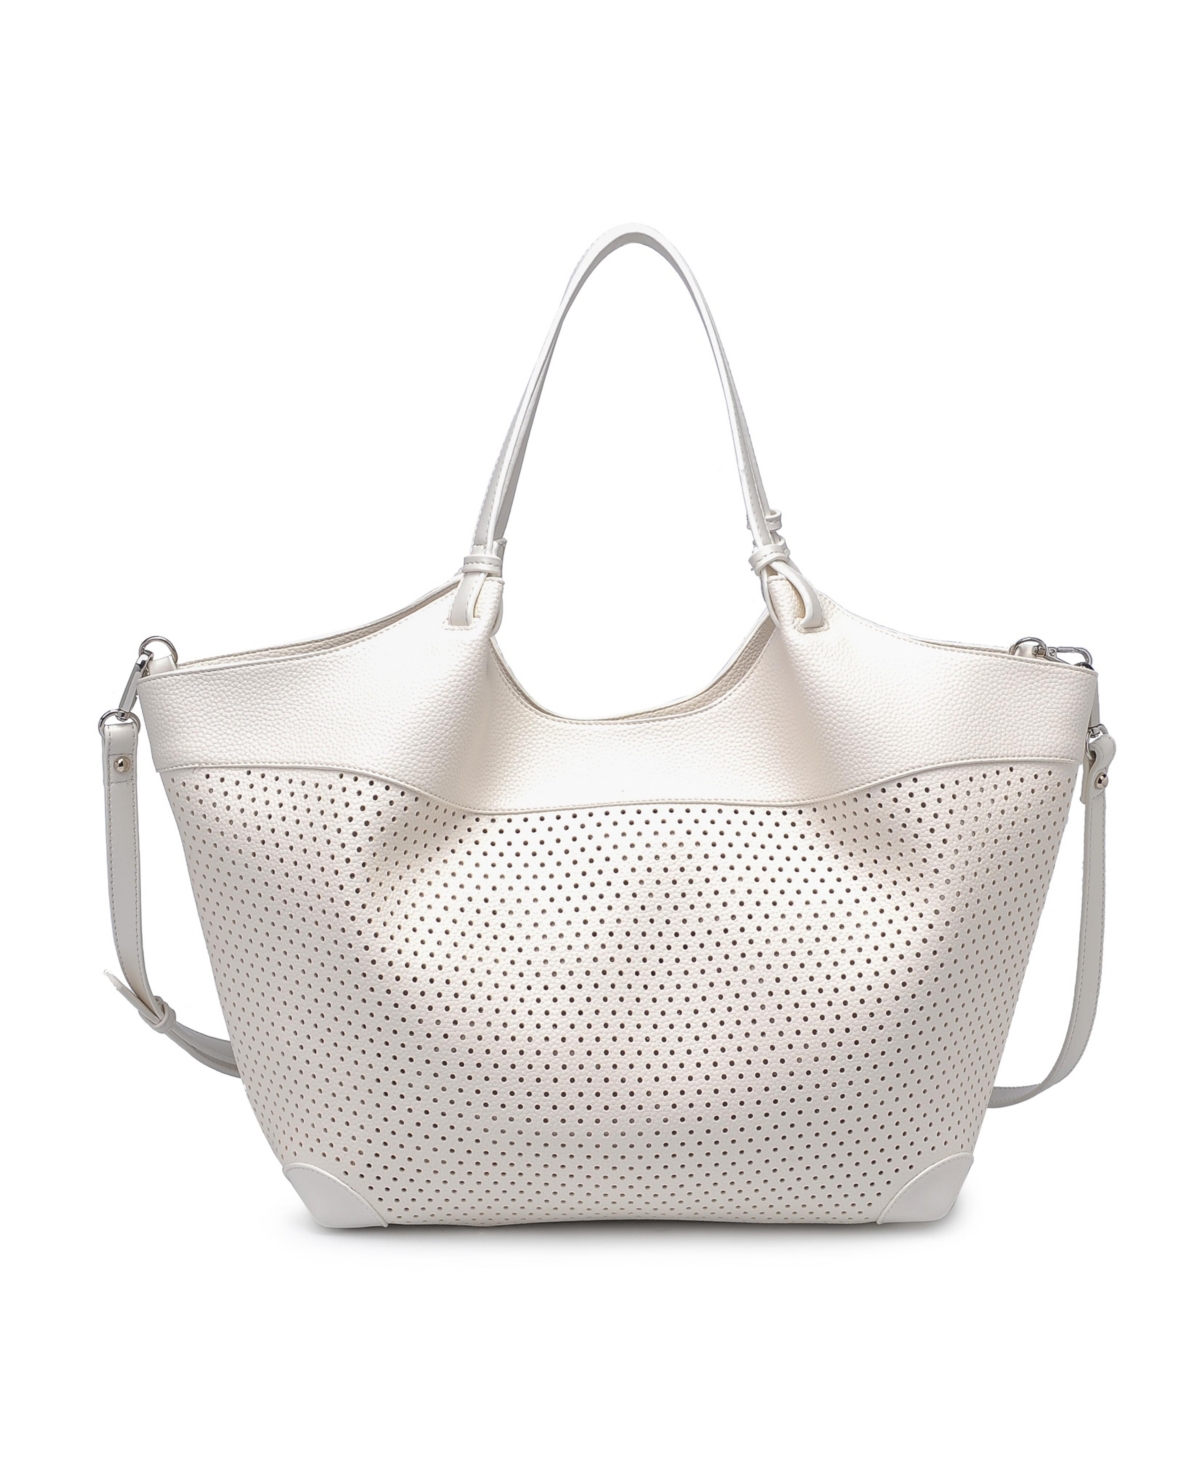 Urban Expressions Samantha Perforated Tote In White